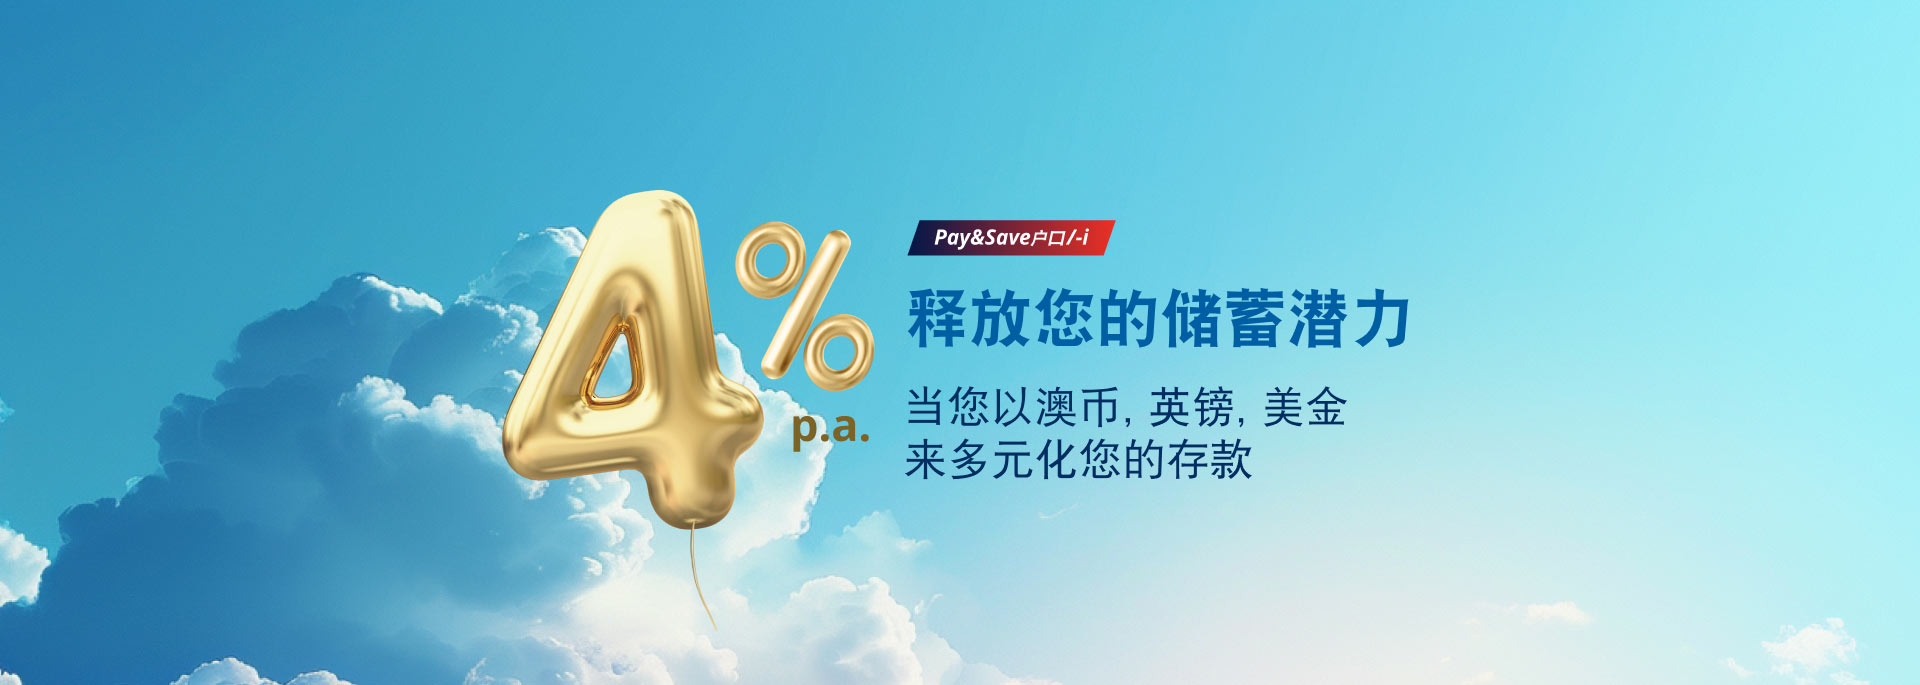 product banner cn